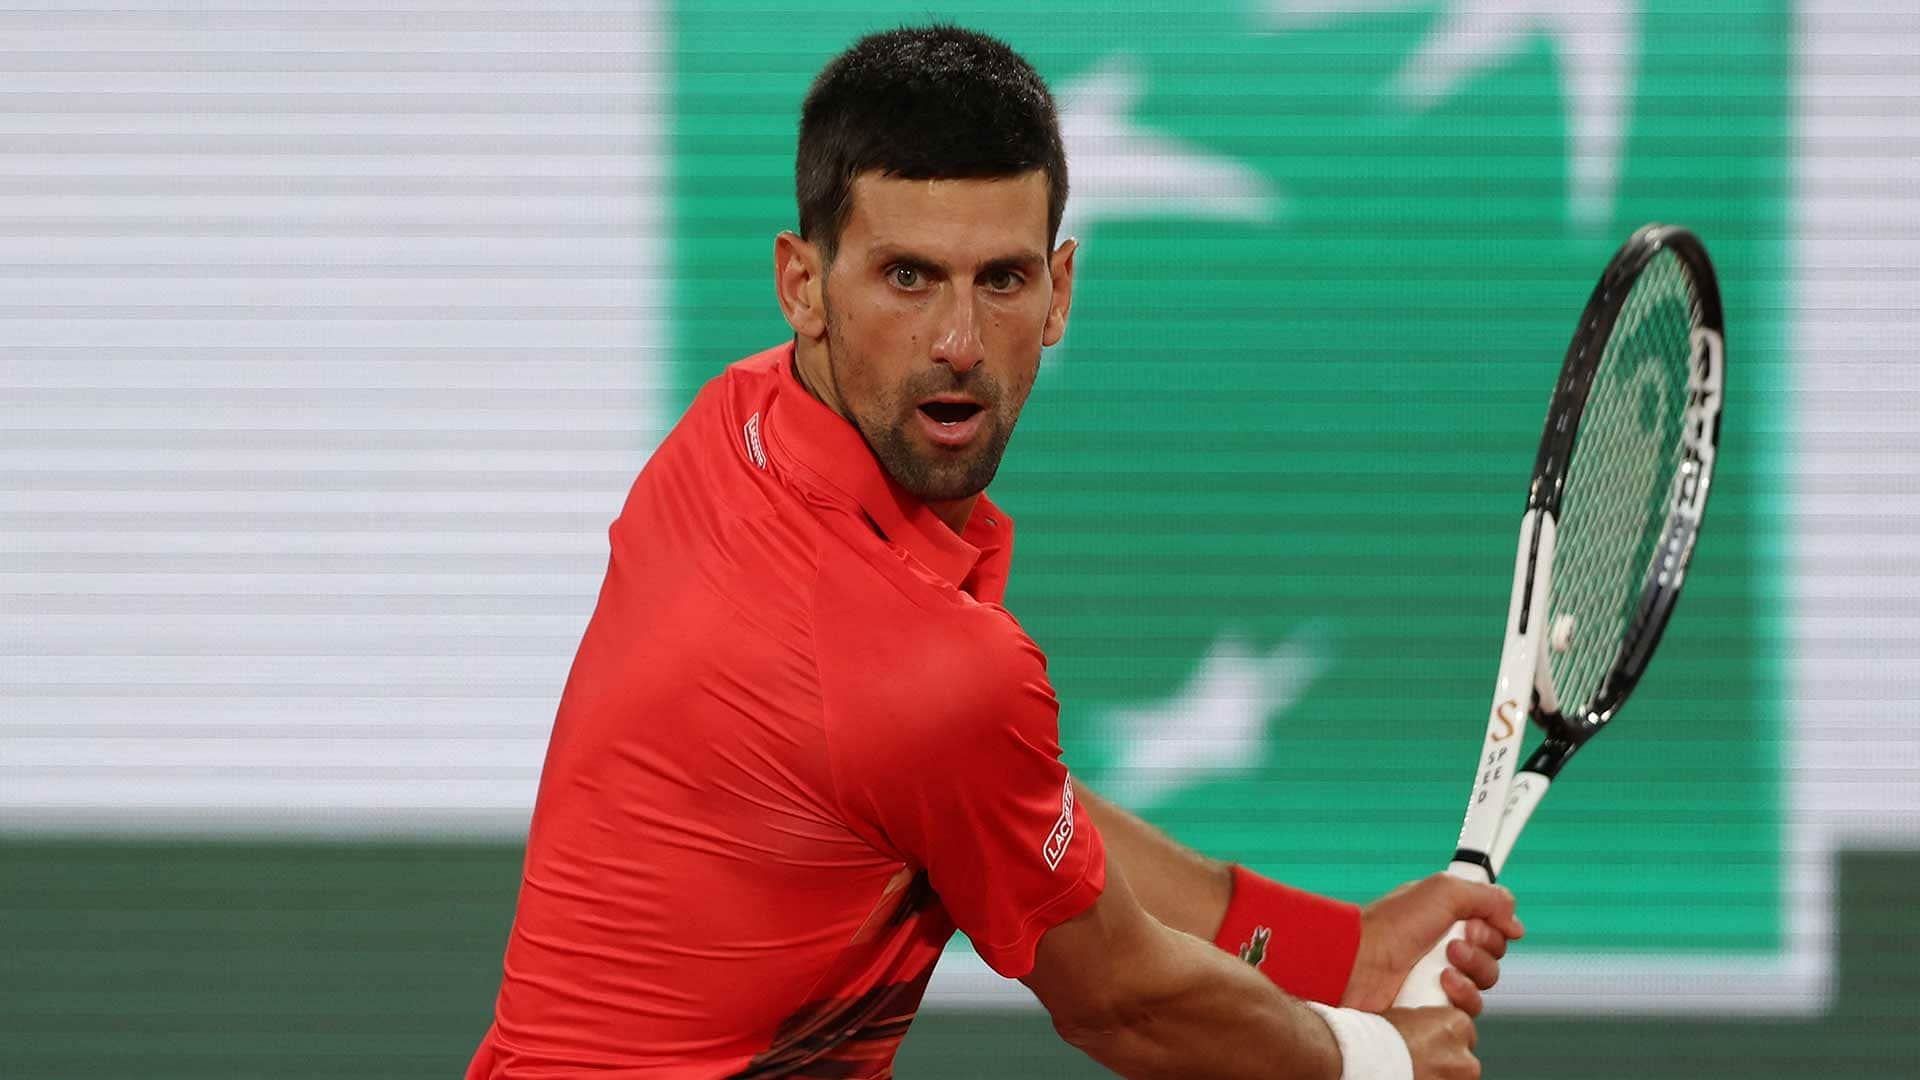 Djokovic showed glimpses of his best tennis in his straight-sets win against Molcan